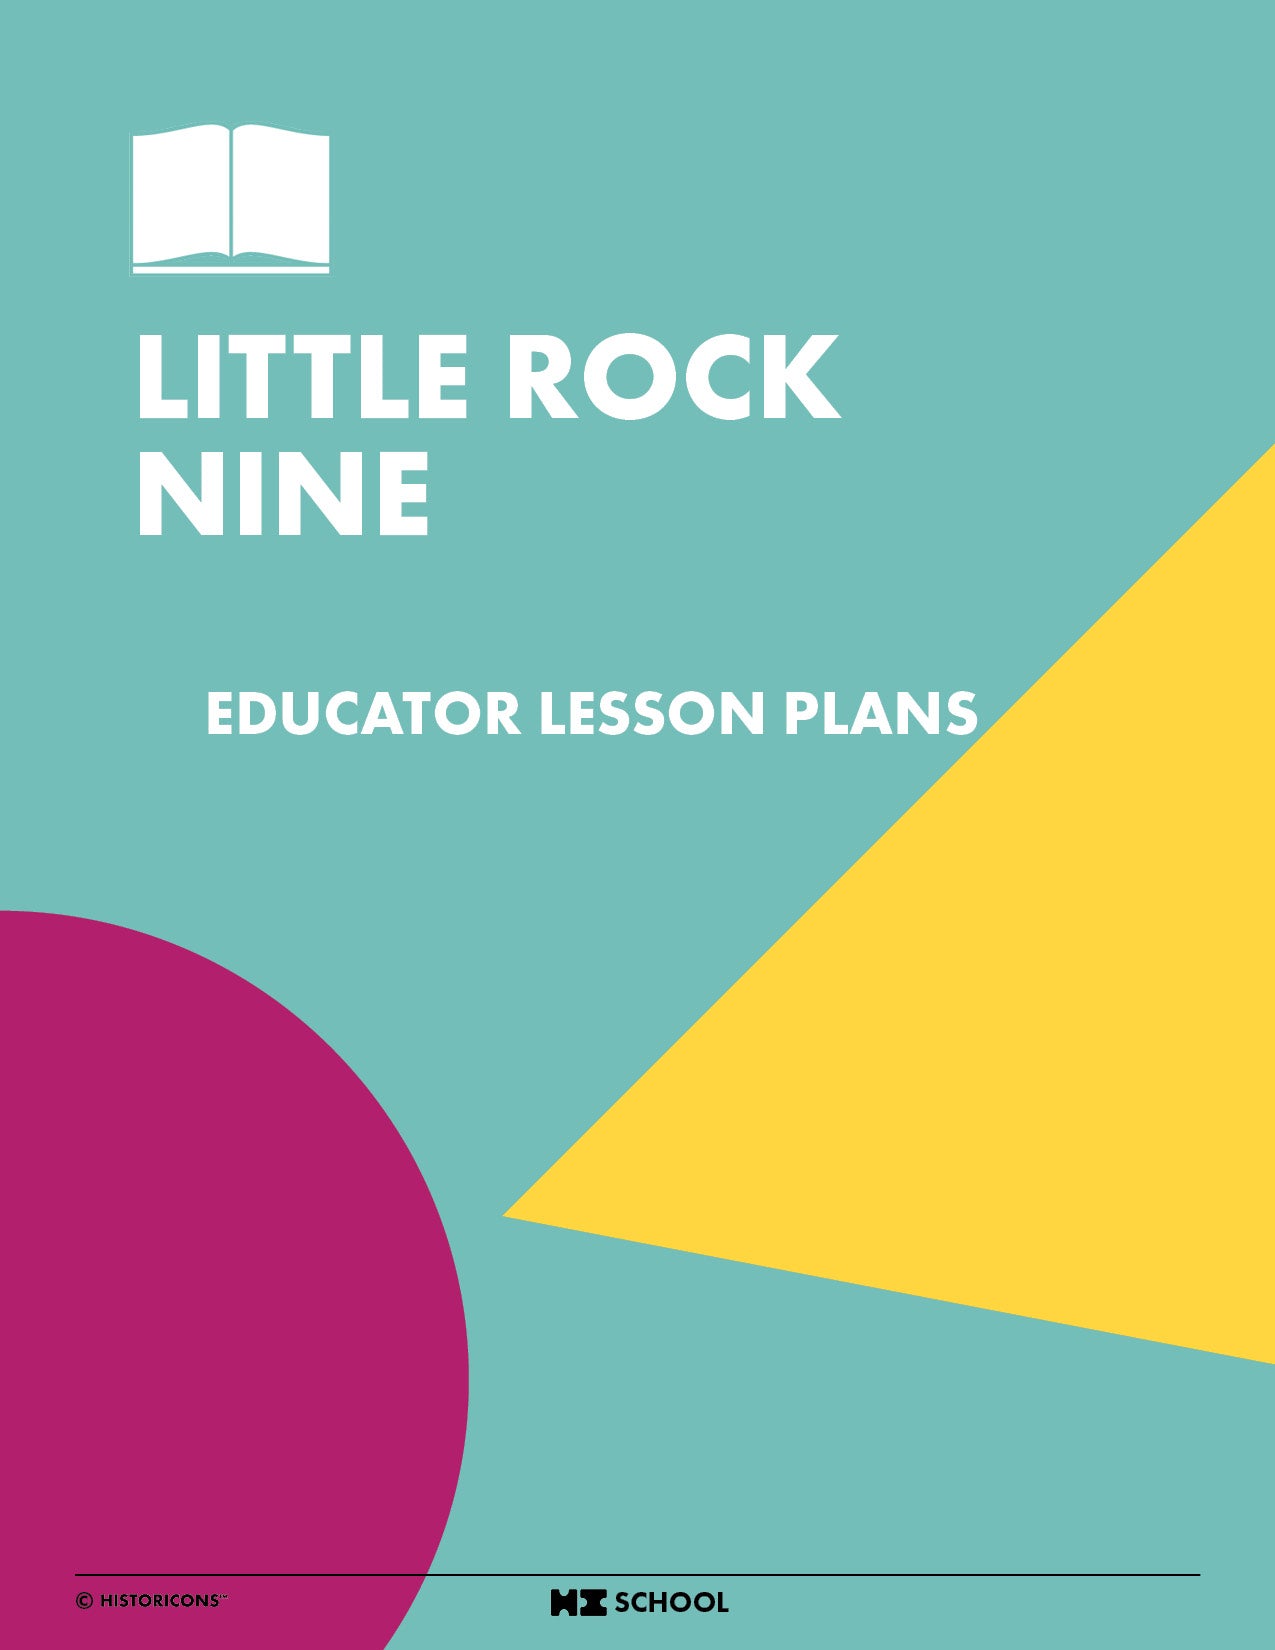 A colorful teal, yellow, and magenta cover photo of the HI School Little Rock Nine educator lesson plans is displayed. A classroom symbol signifies that this classroom resource is suitable for use with elementary and middle school students. 